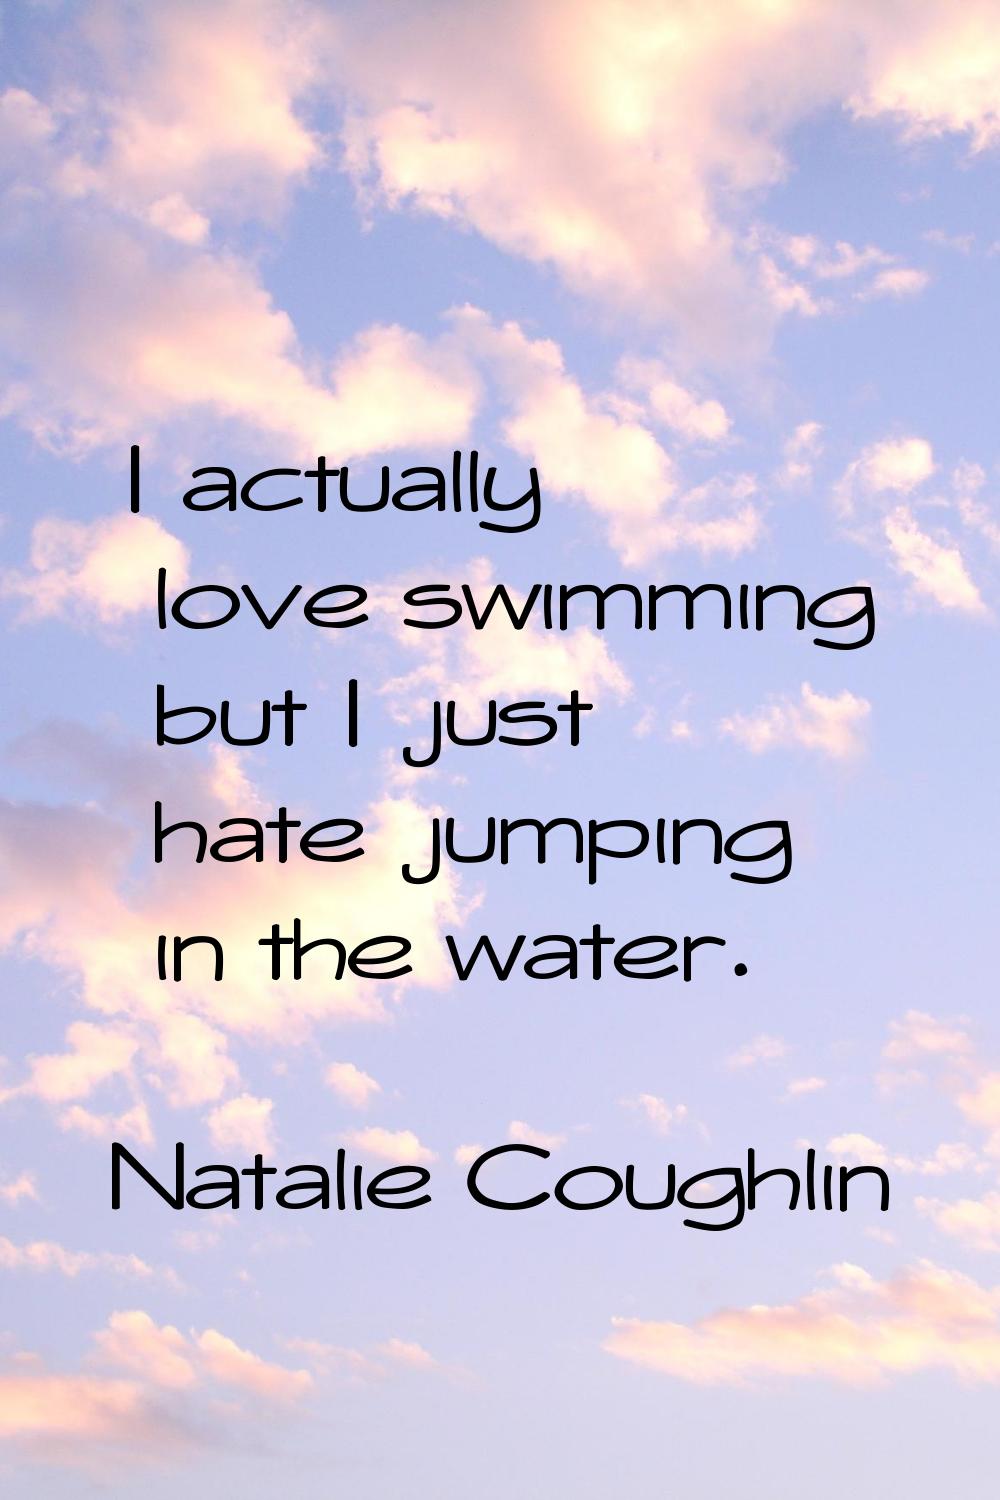 I actually love swimming but I just hate jumping in the water.